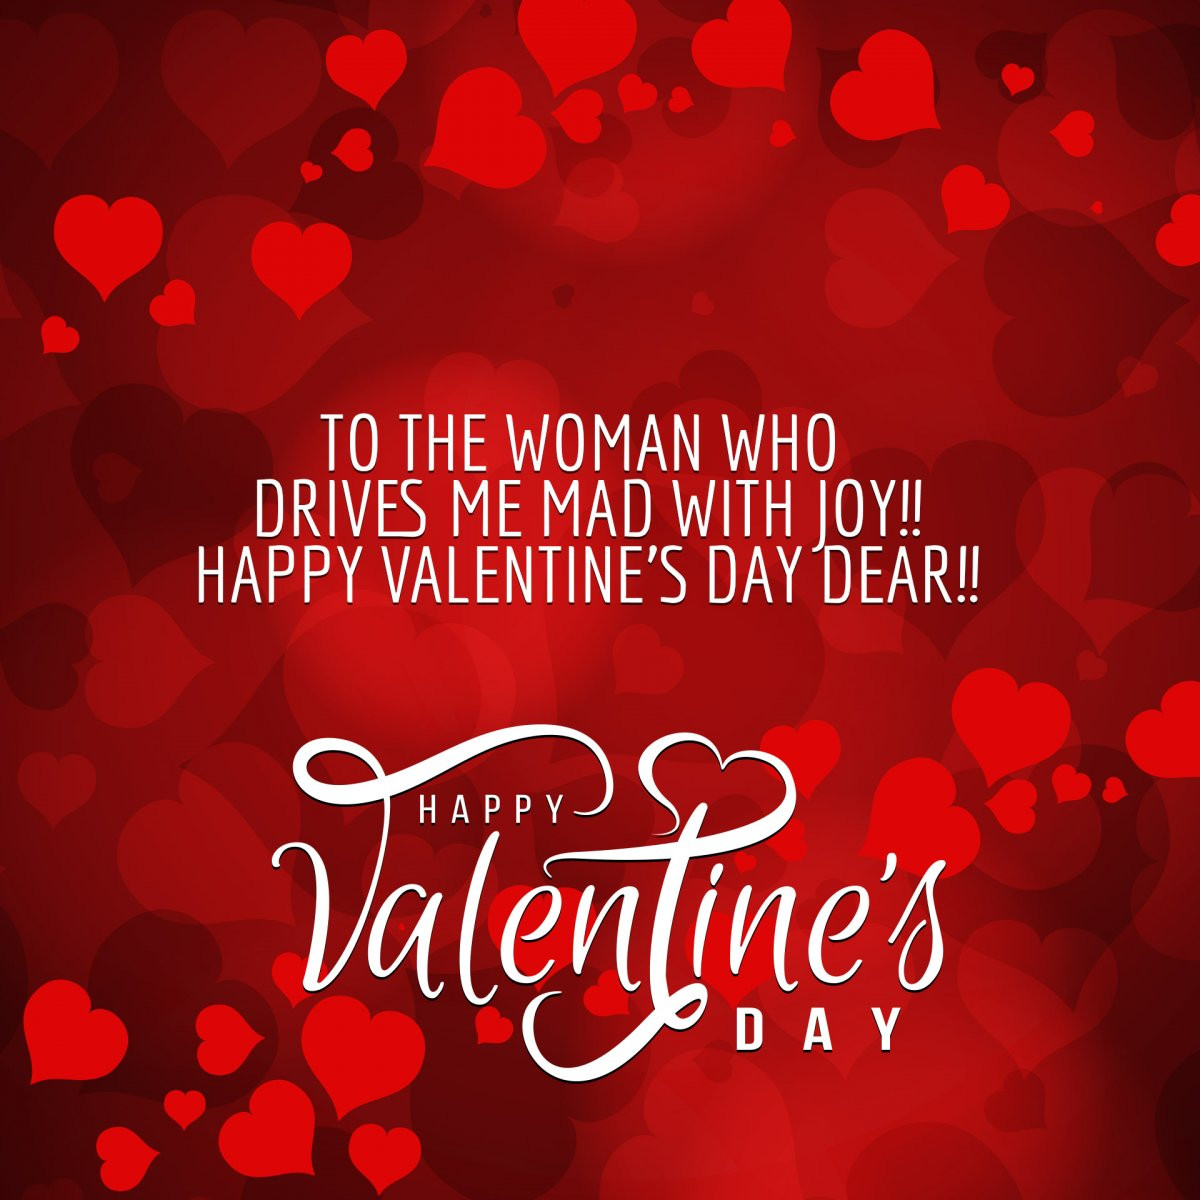 Happy Valentines Day Quotes For Her
 Cute Happy Valentine’s Day 2019 Wishes Messages and Love